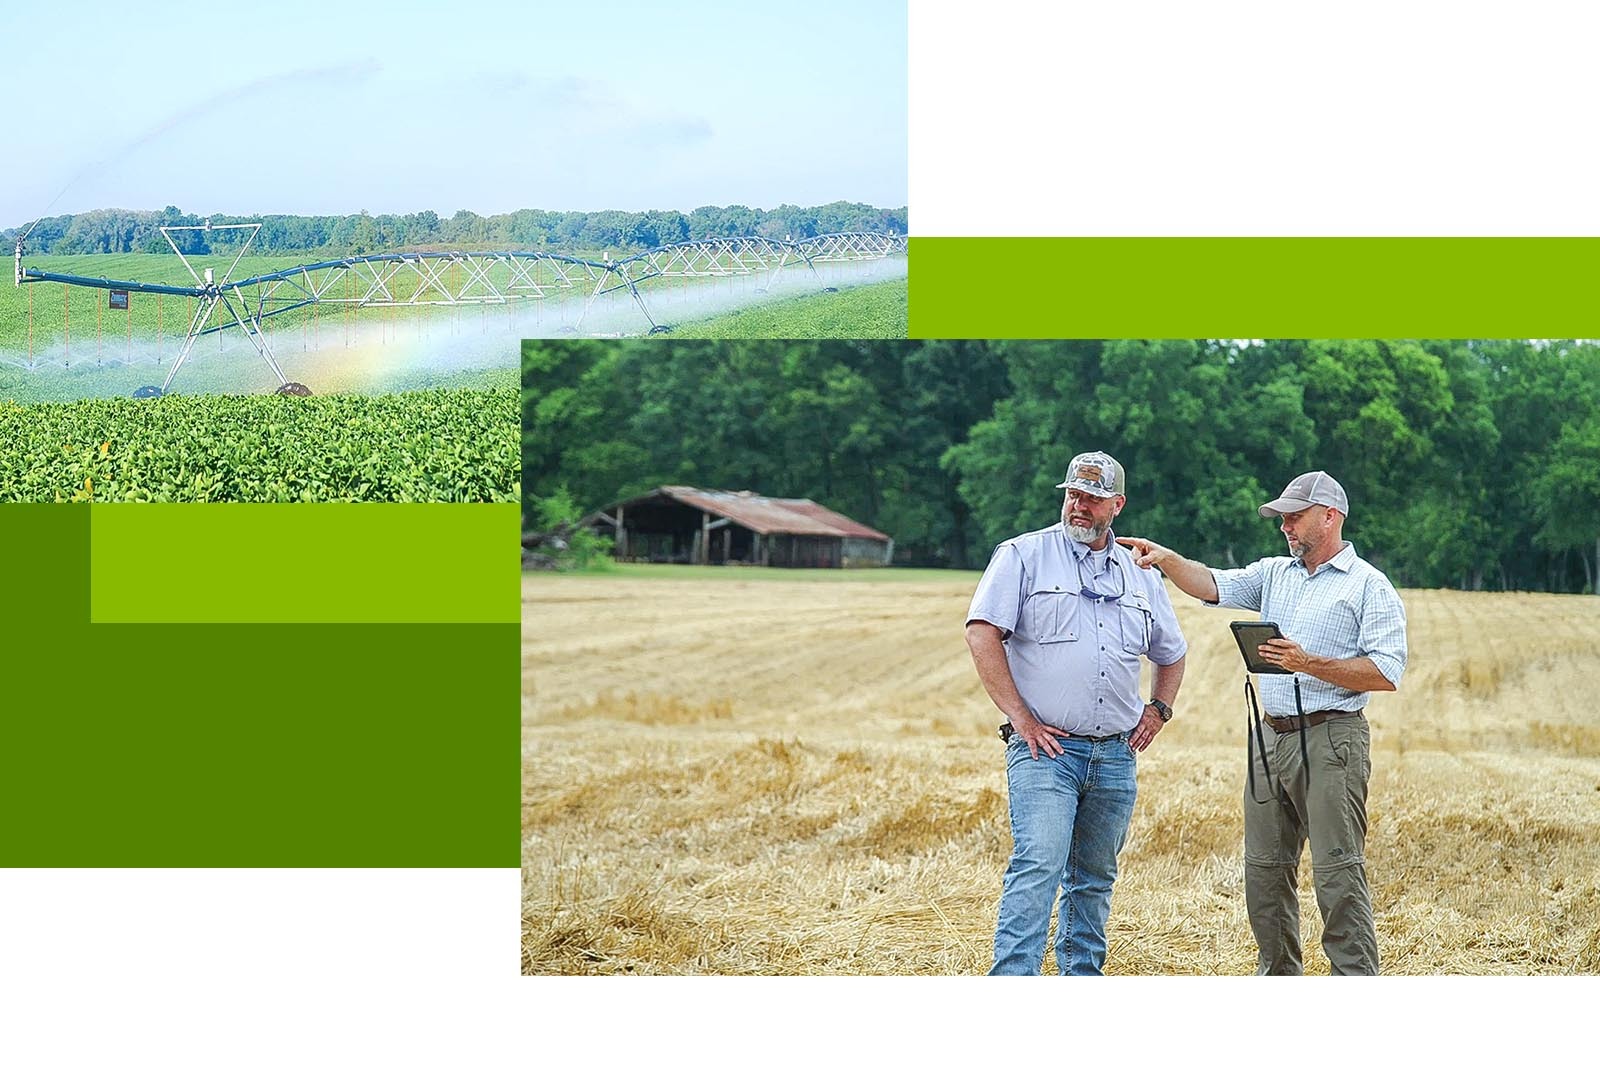 Collage - a field with a rolling irrigation system and two men talking in the field